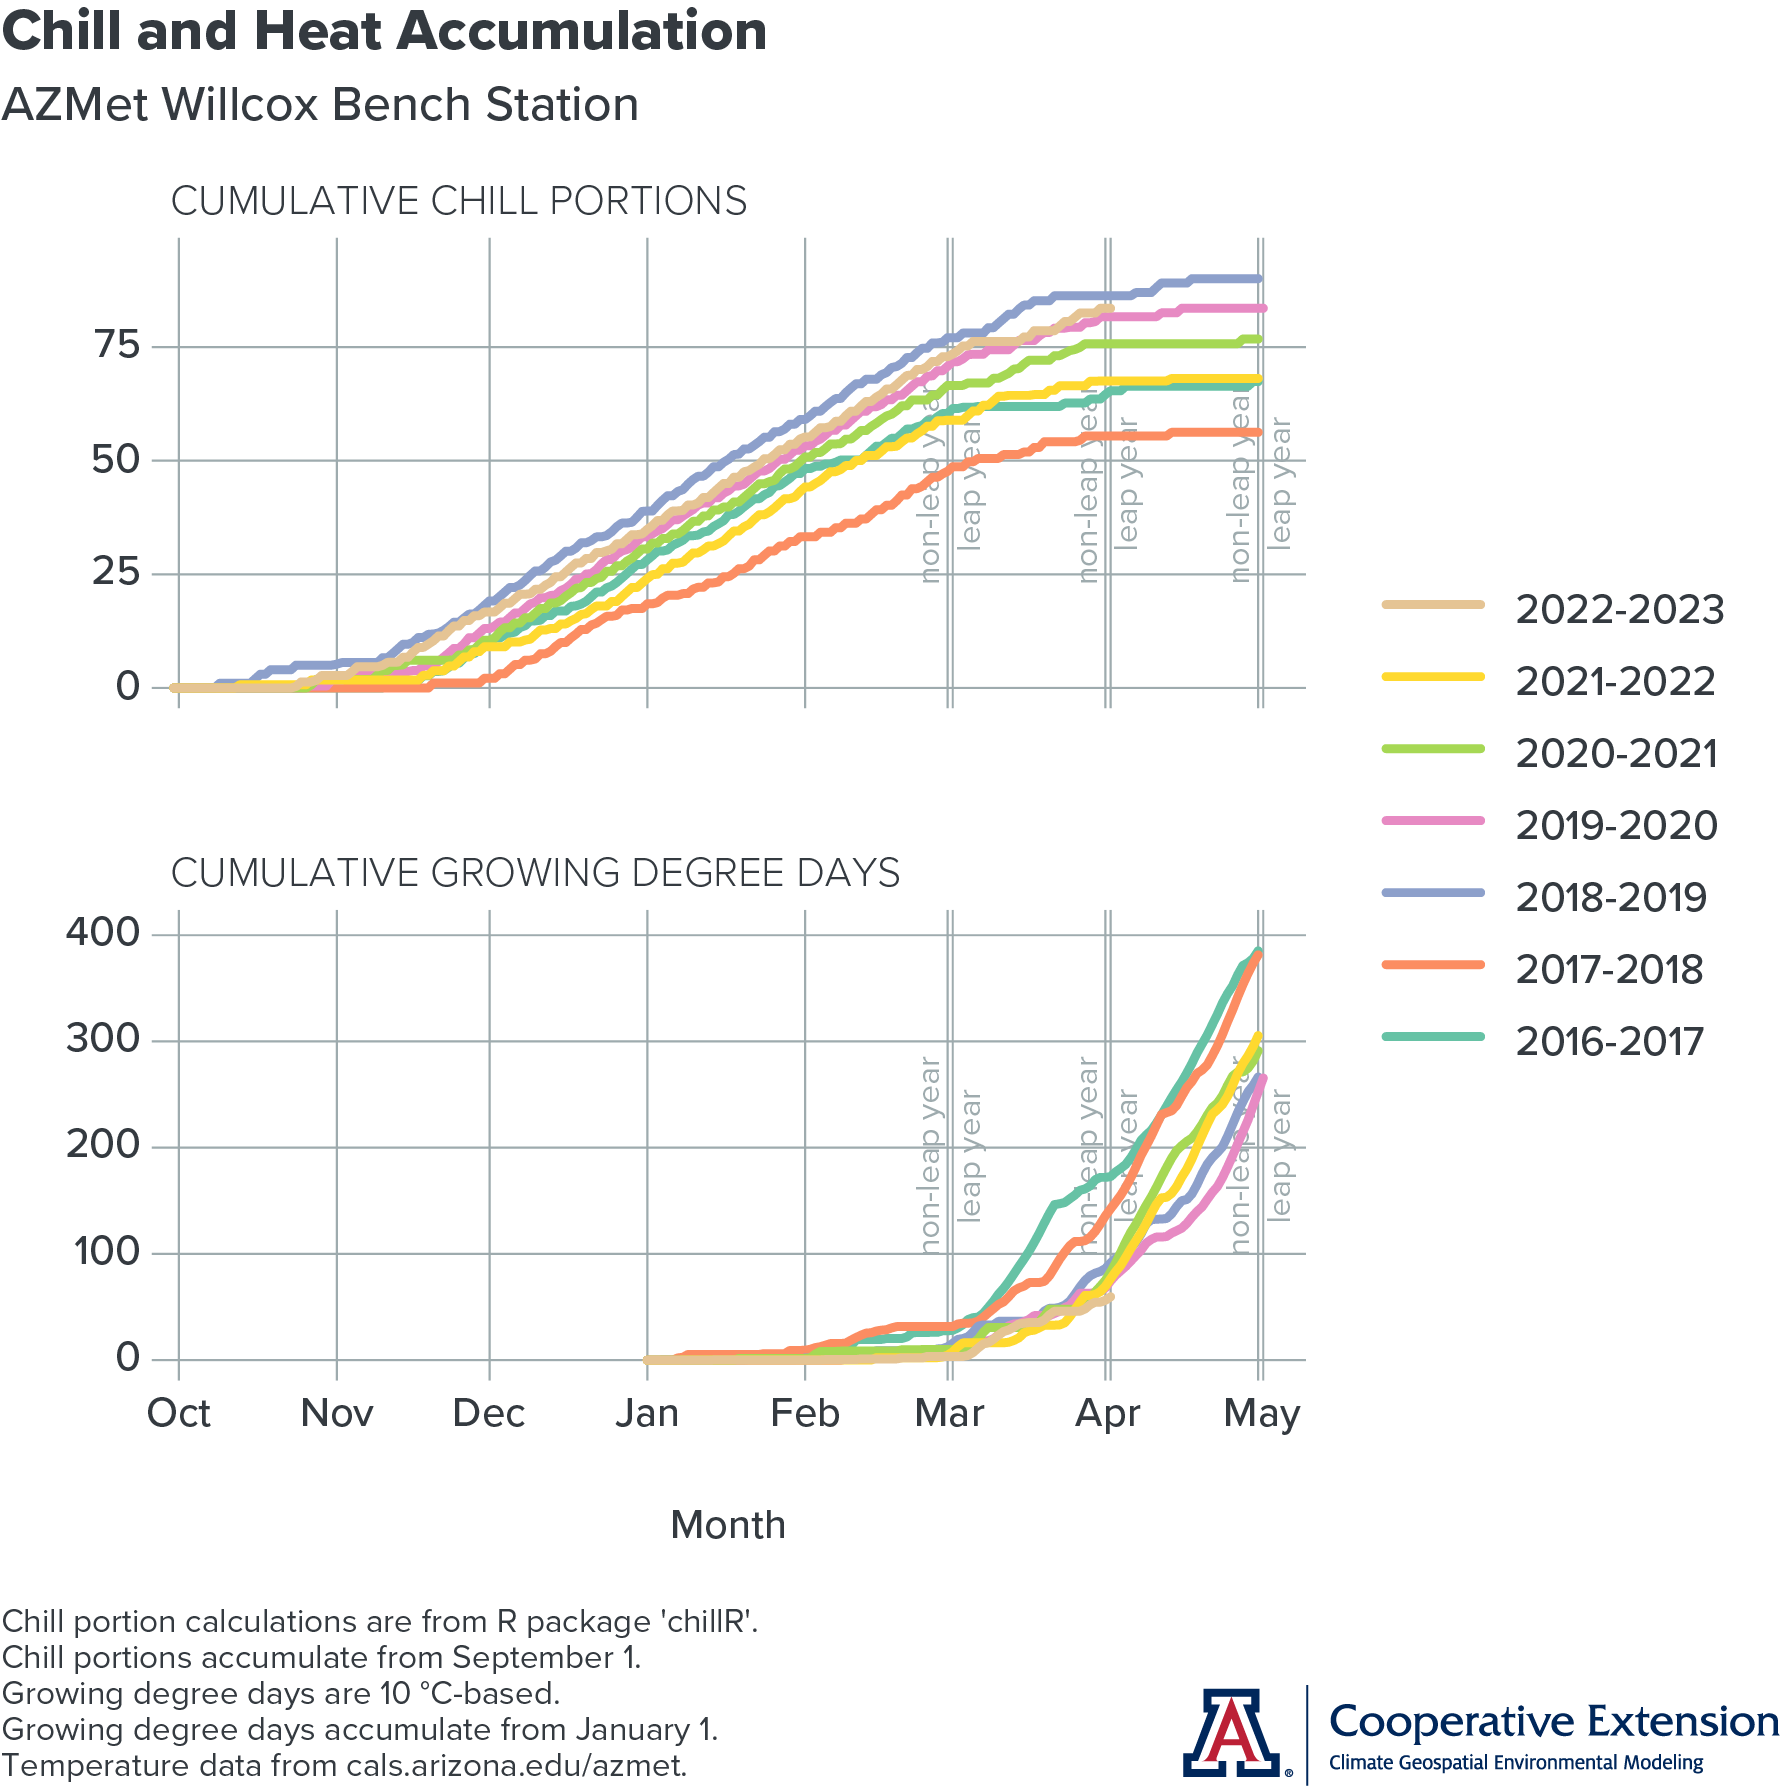 graph of chill and heat accumulation at AZMet Willcox Bench station